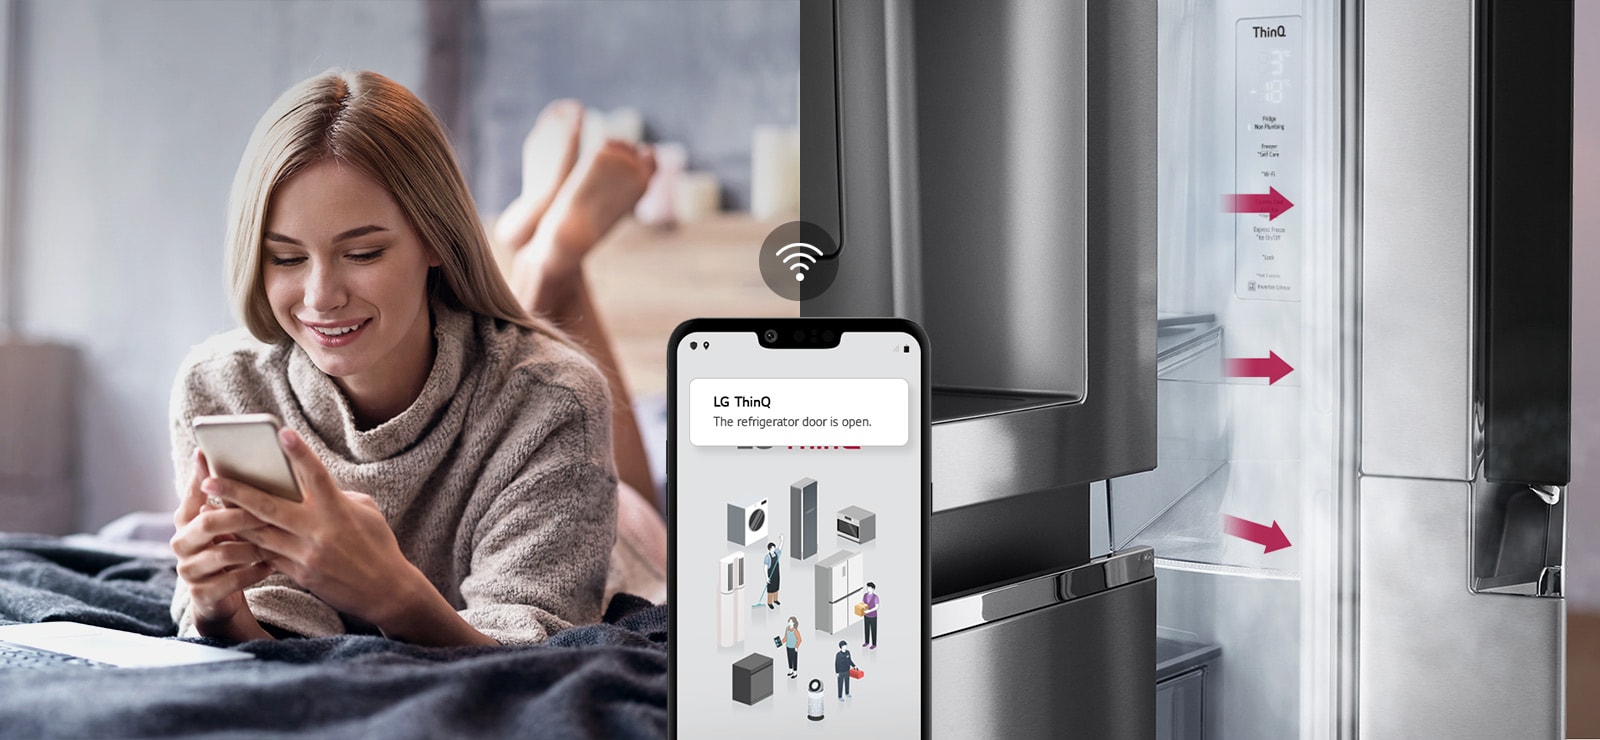 A woman lounges on a bed looking at her phone screen on one image. The second image shows that the refrigerator door has been left open. In the foreground of the two images is the phone screen which shows the LG ThinQ app notifications and the Wifi icon above the phone.